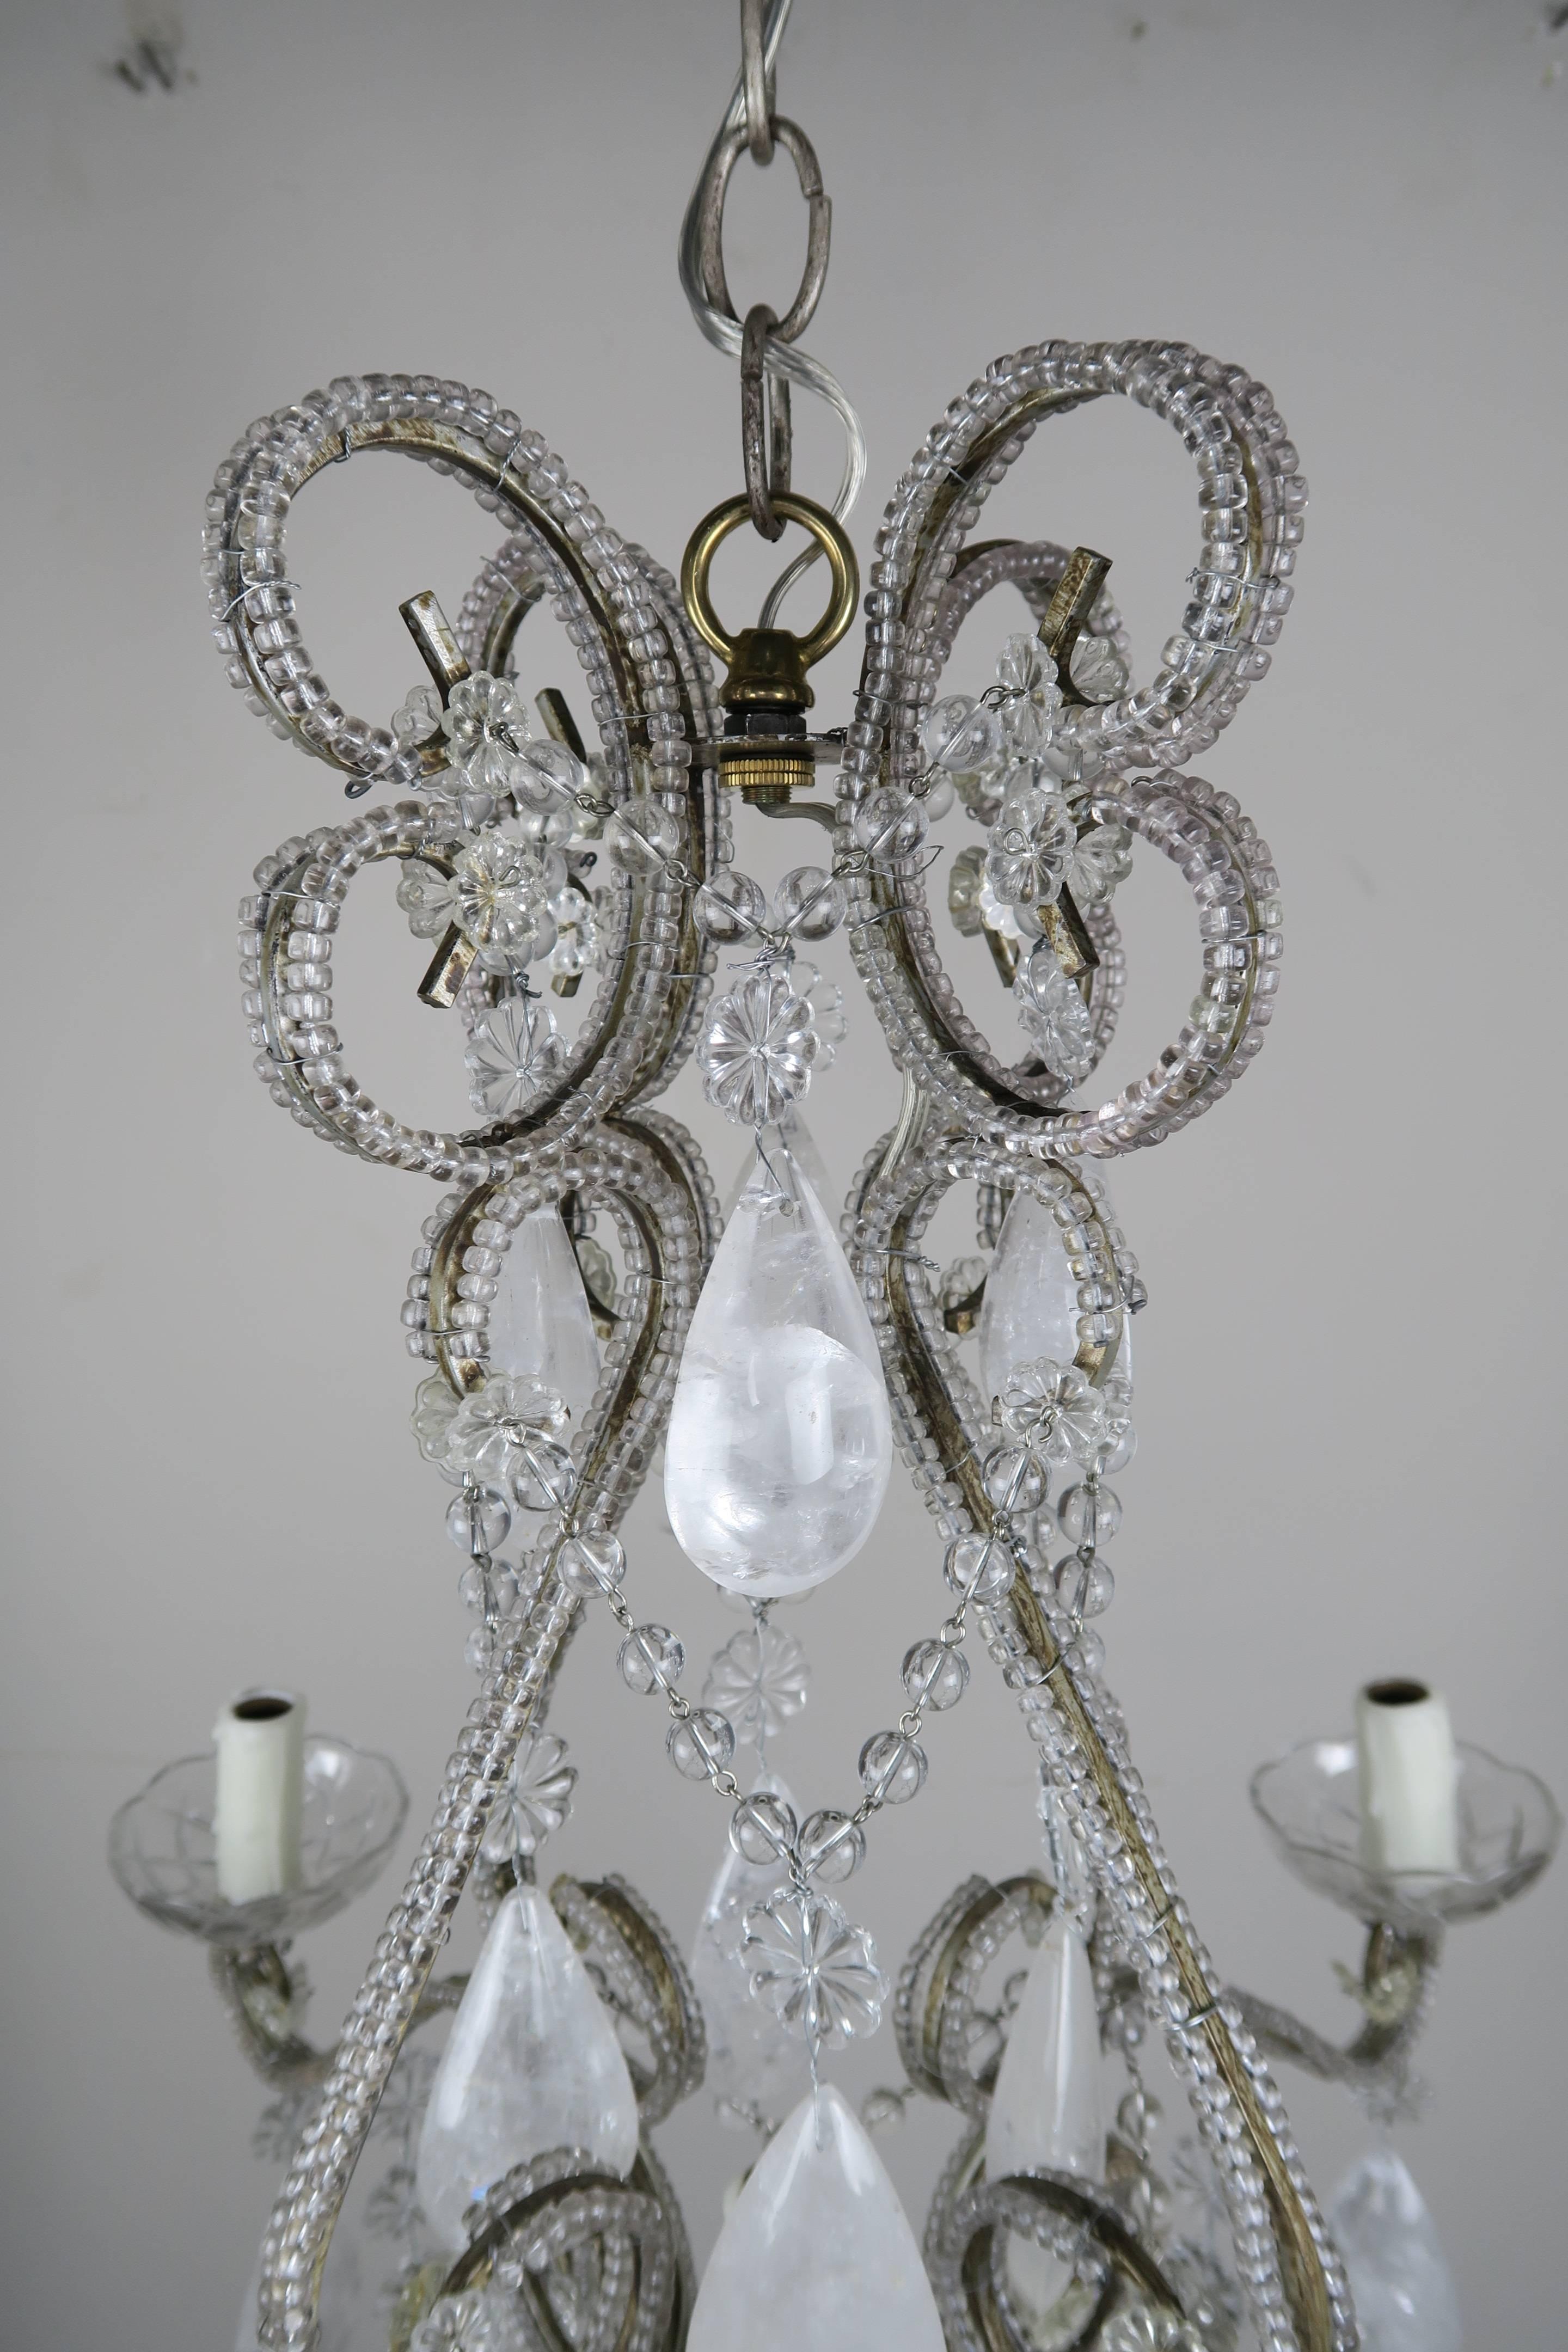 Five-light crystal beaded chandelier adorned with almond shaped rock crystals and a large rock crystal ball at the bottom. The fixture has been newly rewired with drip wax candle covers. Chain and canopy included.